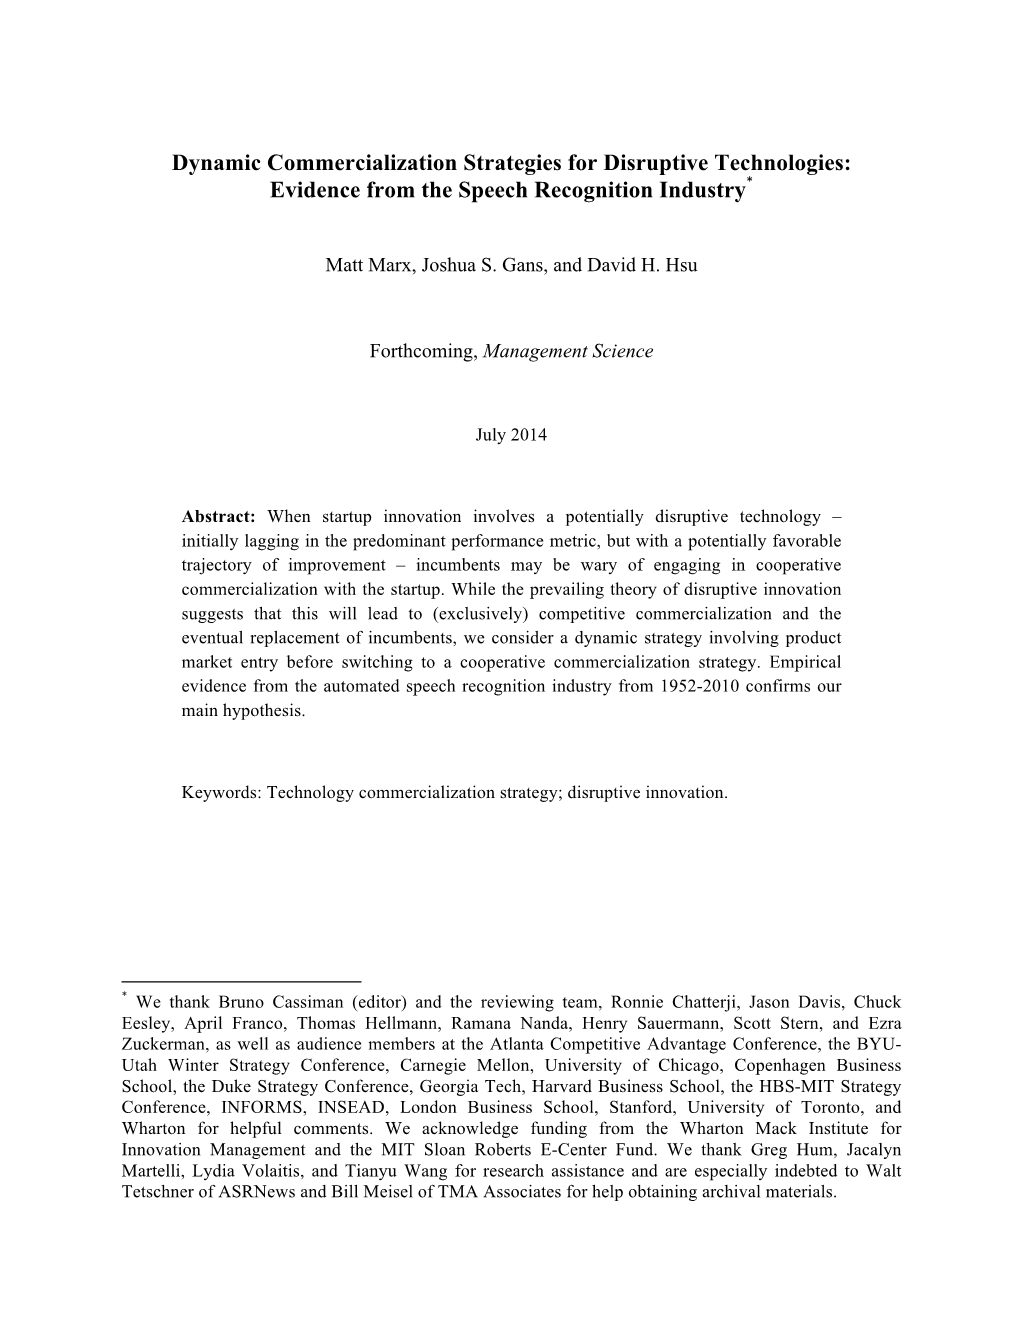 Dynamic Commercialization Strategies for Disruptive Technologies: Evidence from the Speech Recognition Industry* "